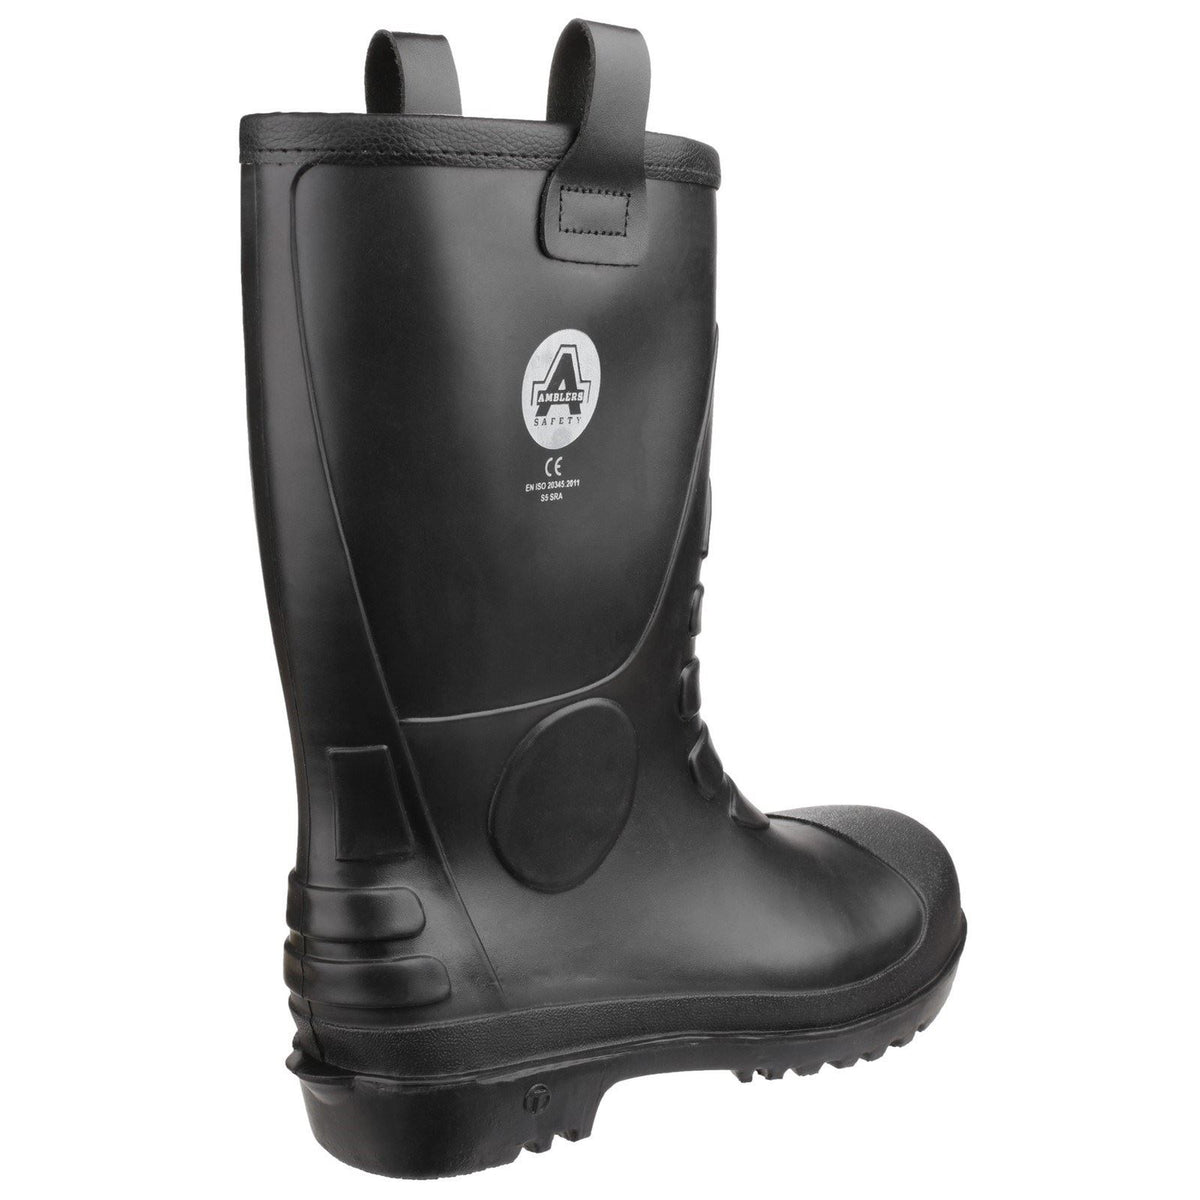 Amblers Safety FS90 Waterproof PVC Pull on Safety Rigger Boots